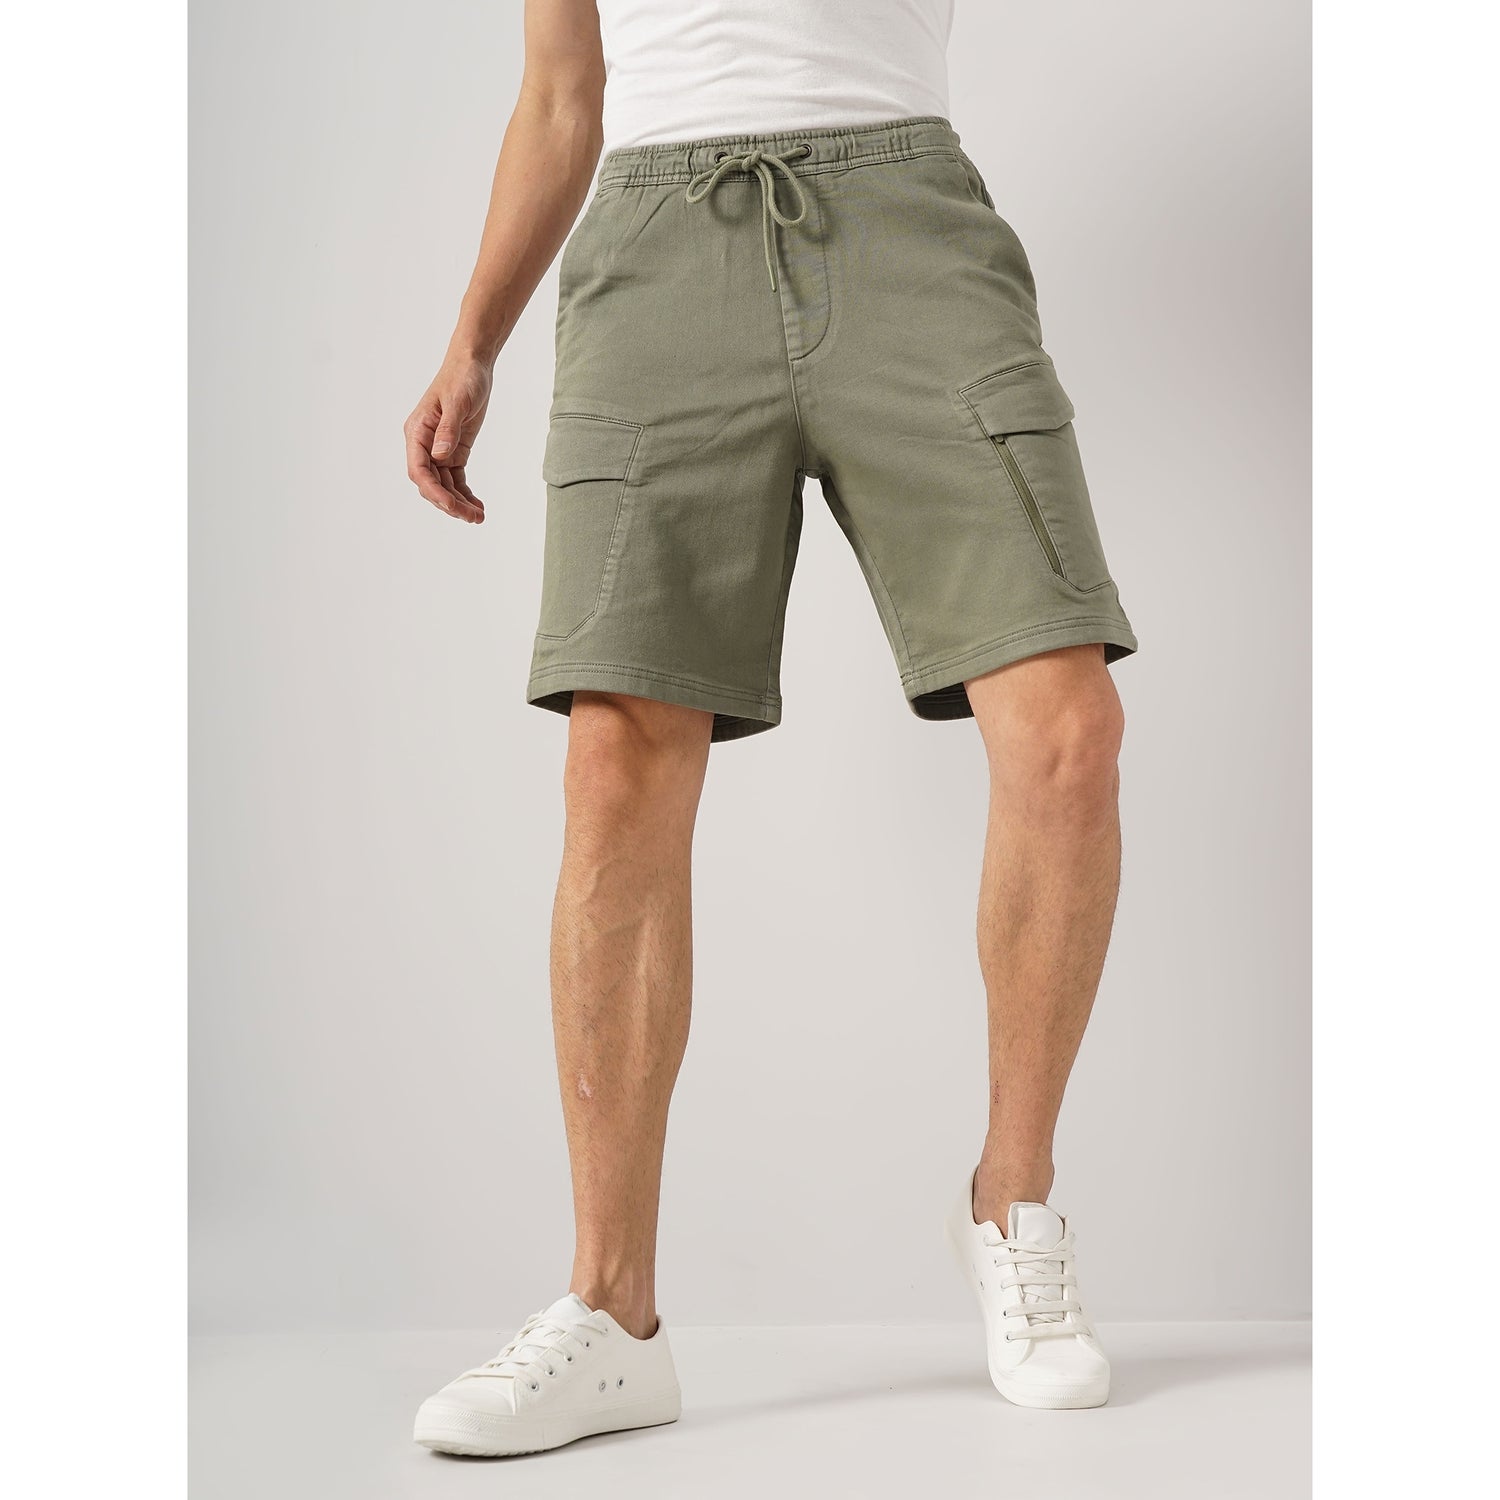 Men Olive Solid Loose Fit Cotton Casual Shorts (GOJOGBM)